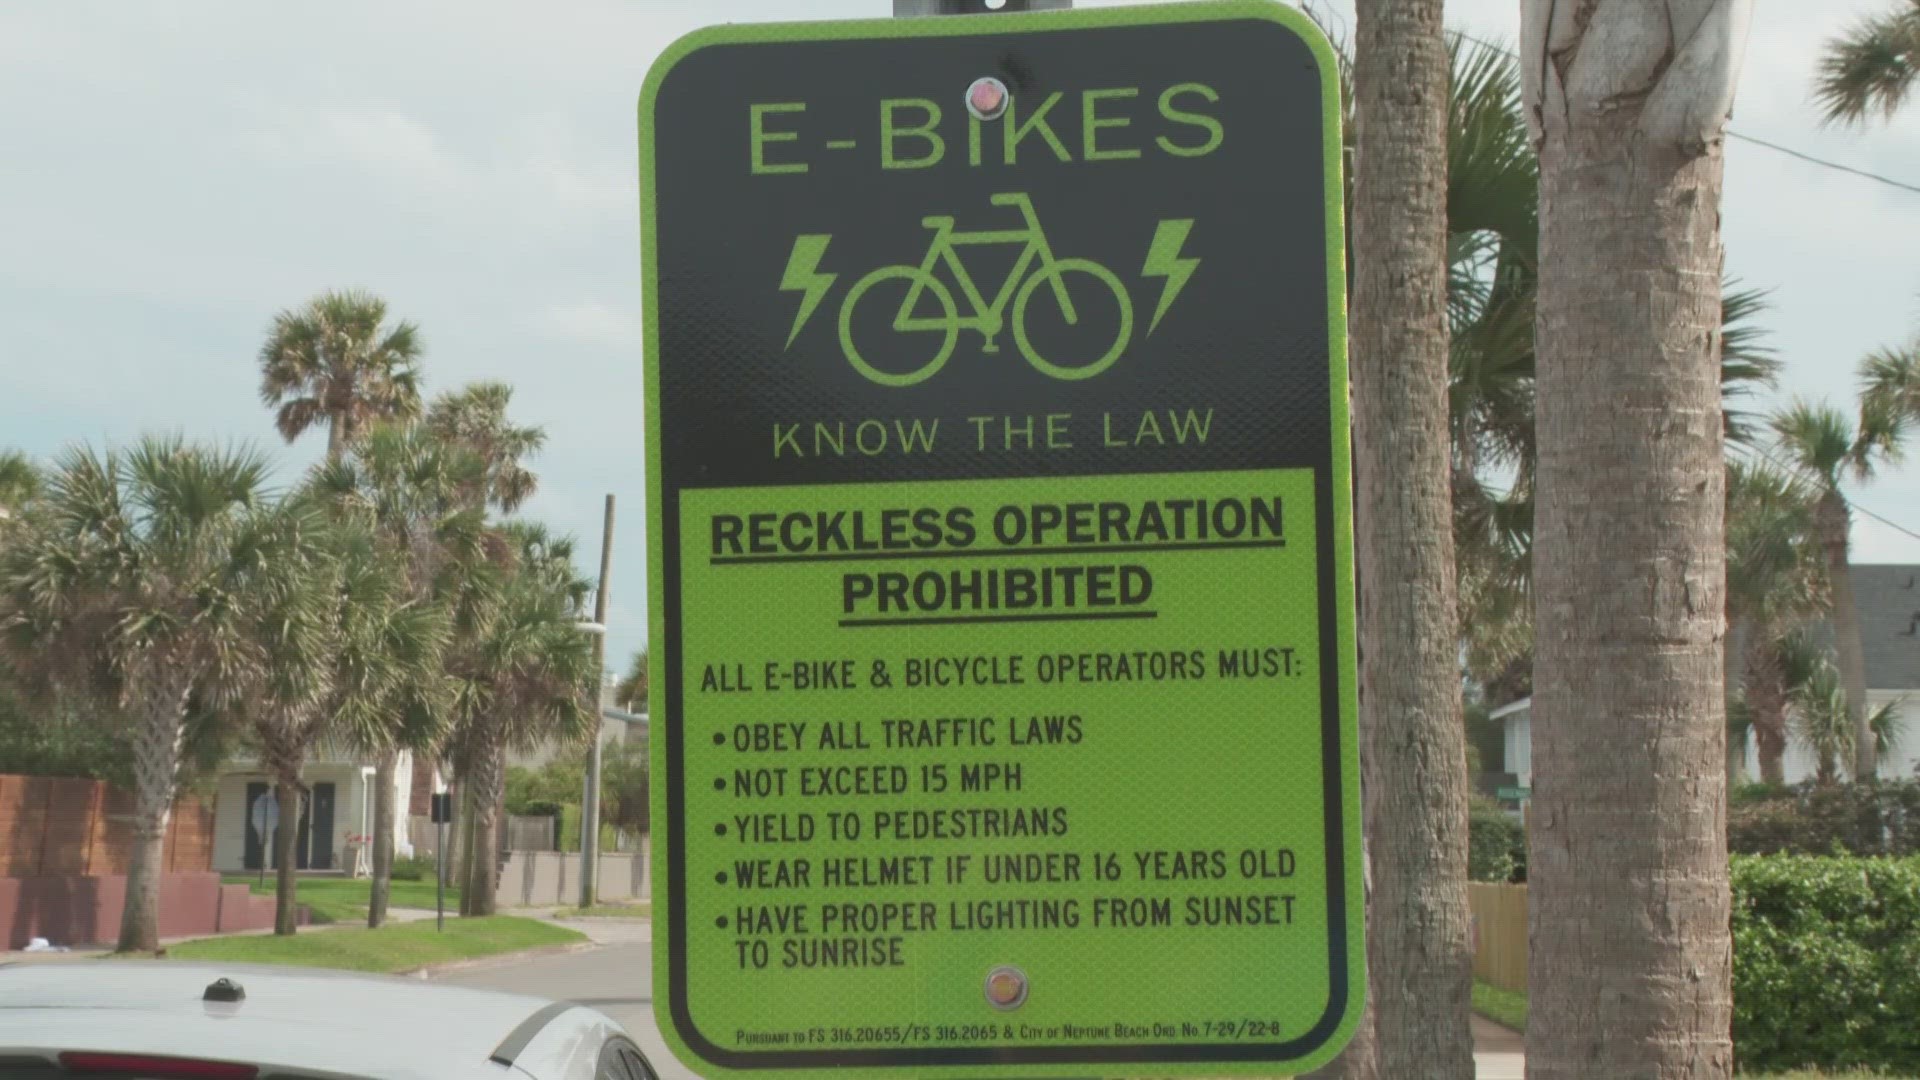 The City of Neptune Beach passed an ordinance two years ago setting the speed limit for e-bikes at 15 miles per hour, anything above that is considered reckless use.